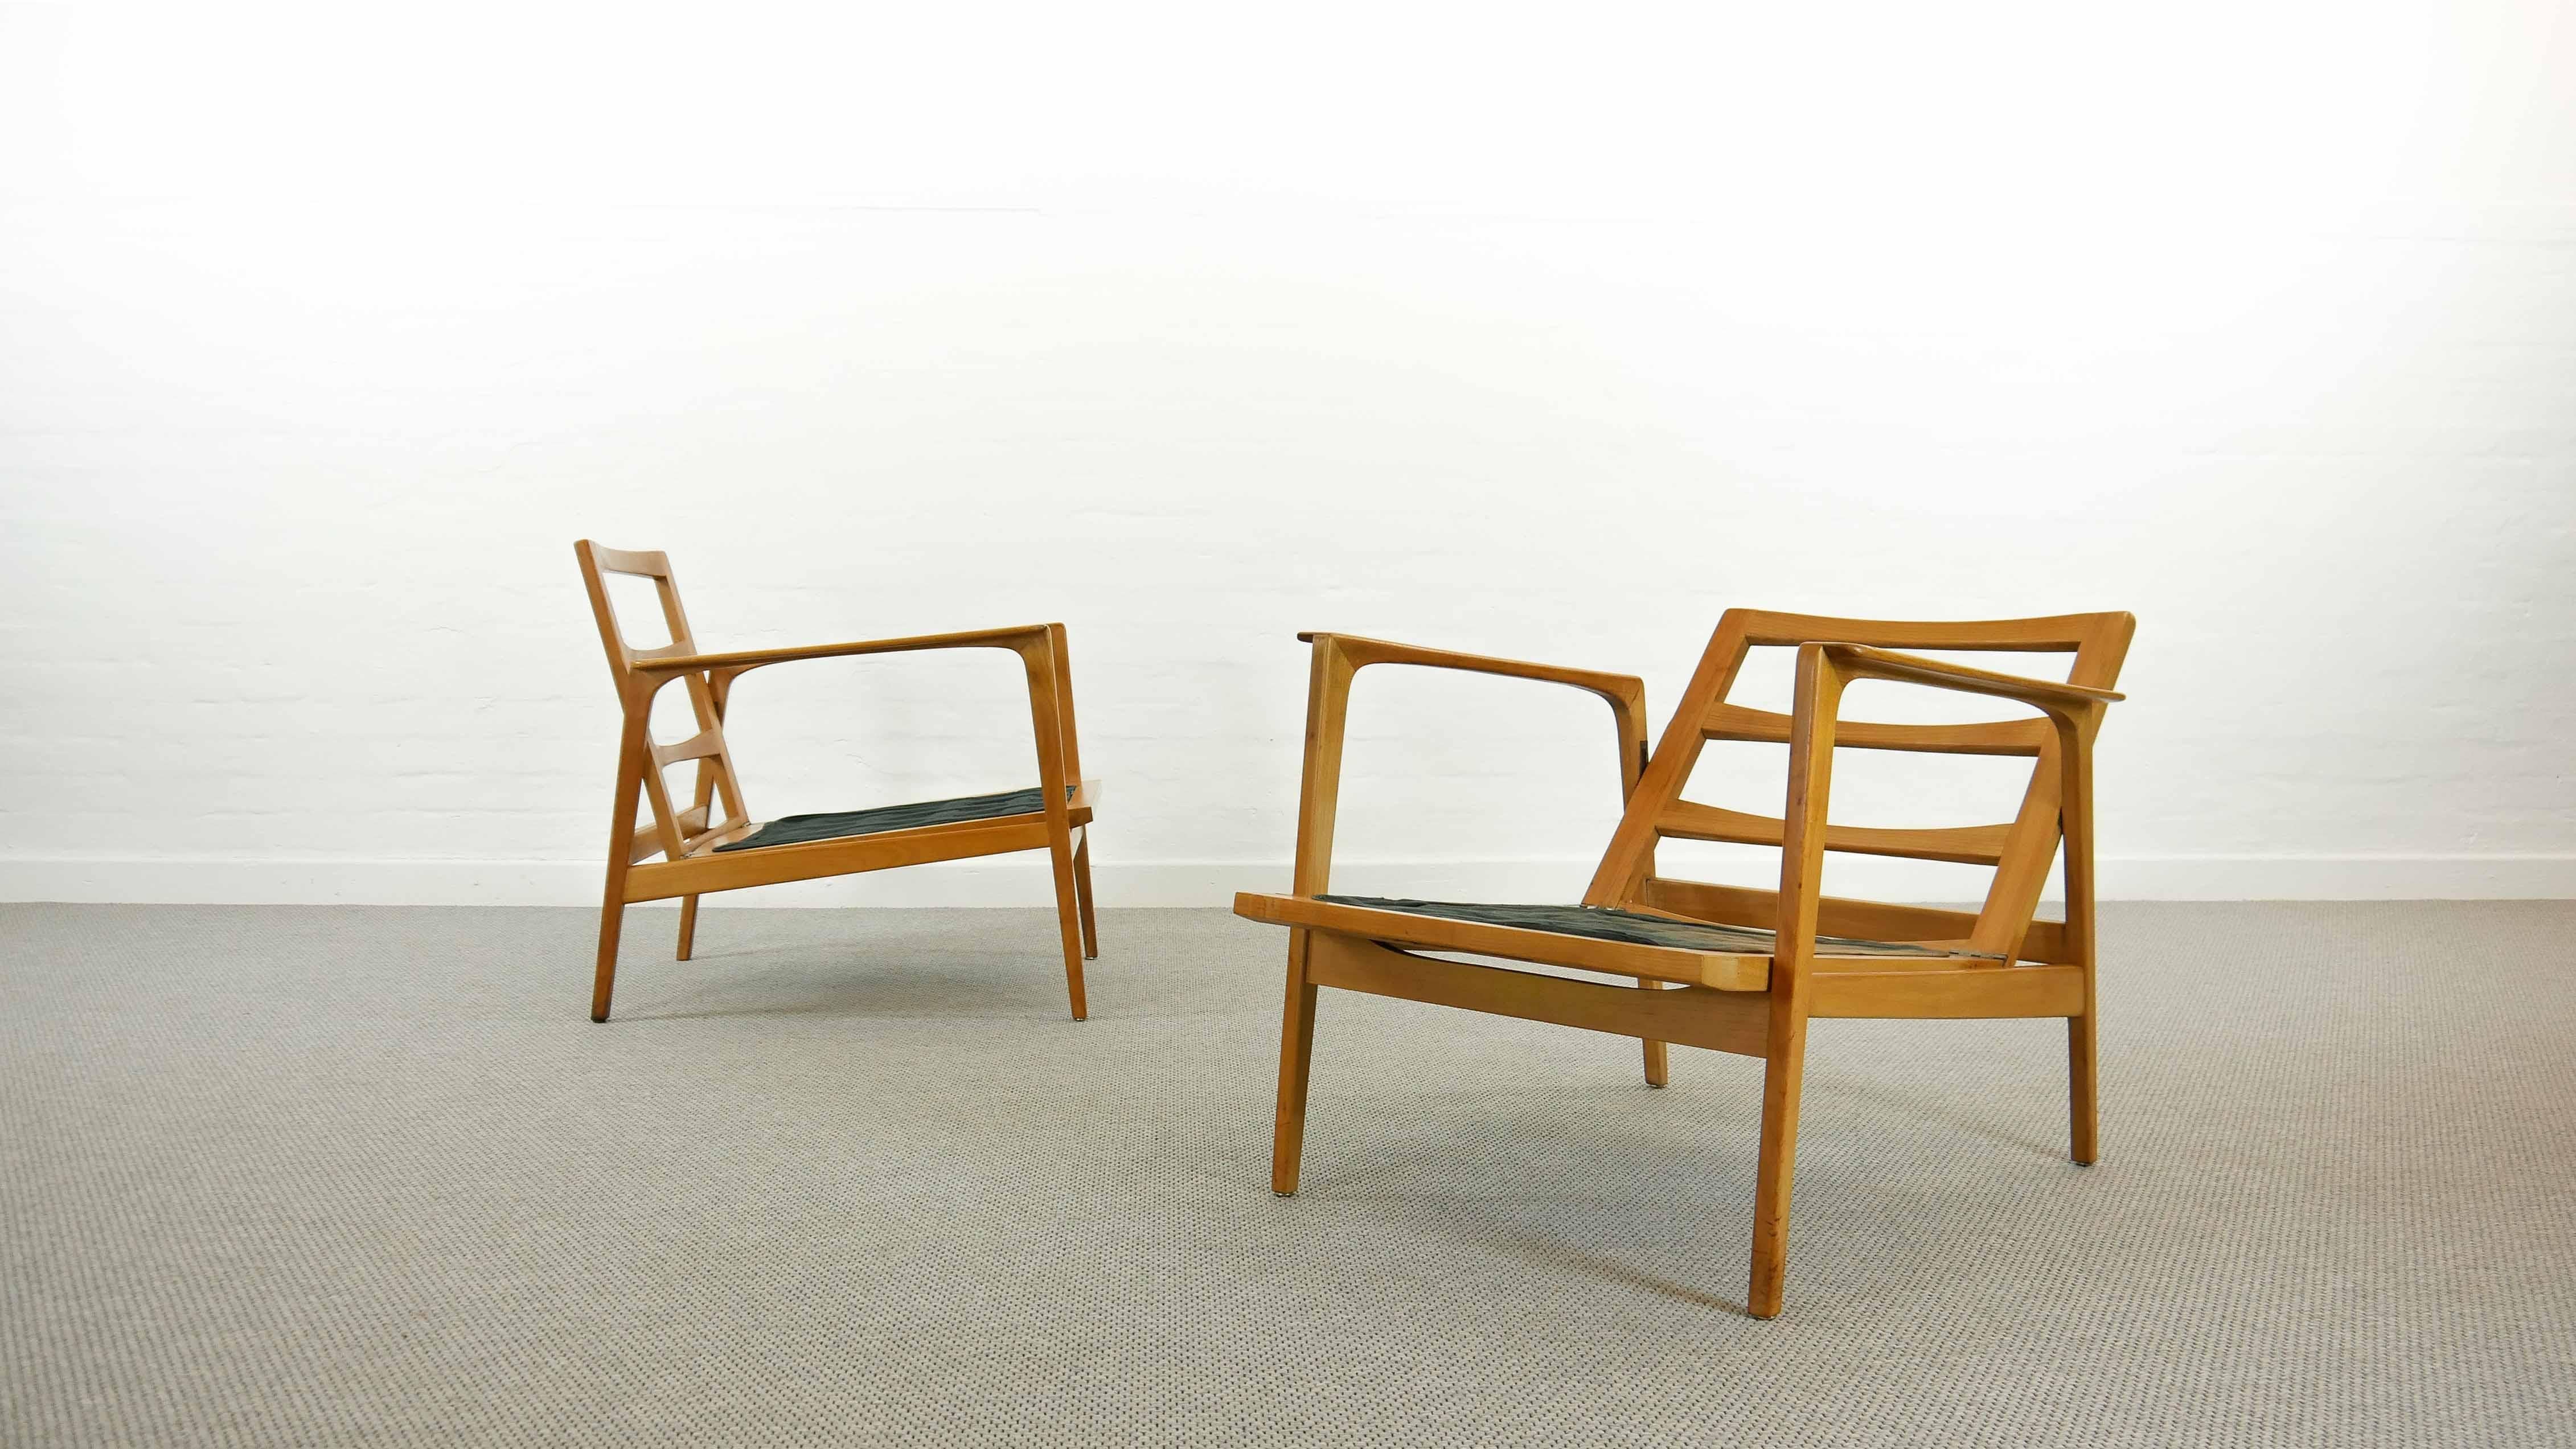 A pair of convertible modern midcentury chairs from Germany.
Made of solid beech and upholstered with the original wool garment.
A nice example of German Craftsmanship of the 1960s.

They were part of the 2019 Exhibition of the: Museum